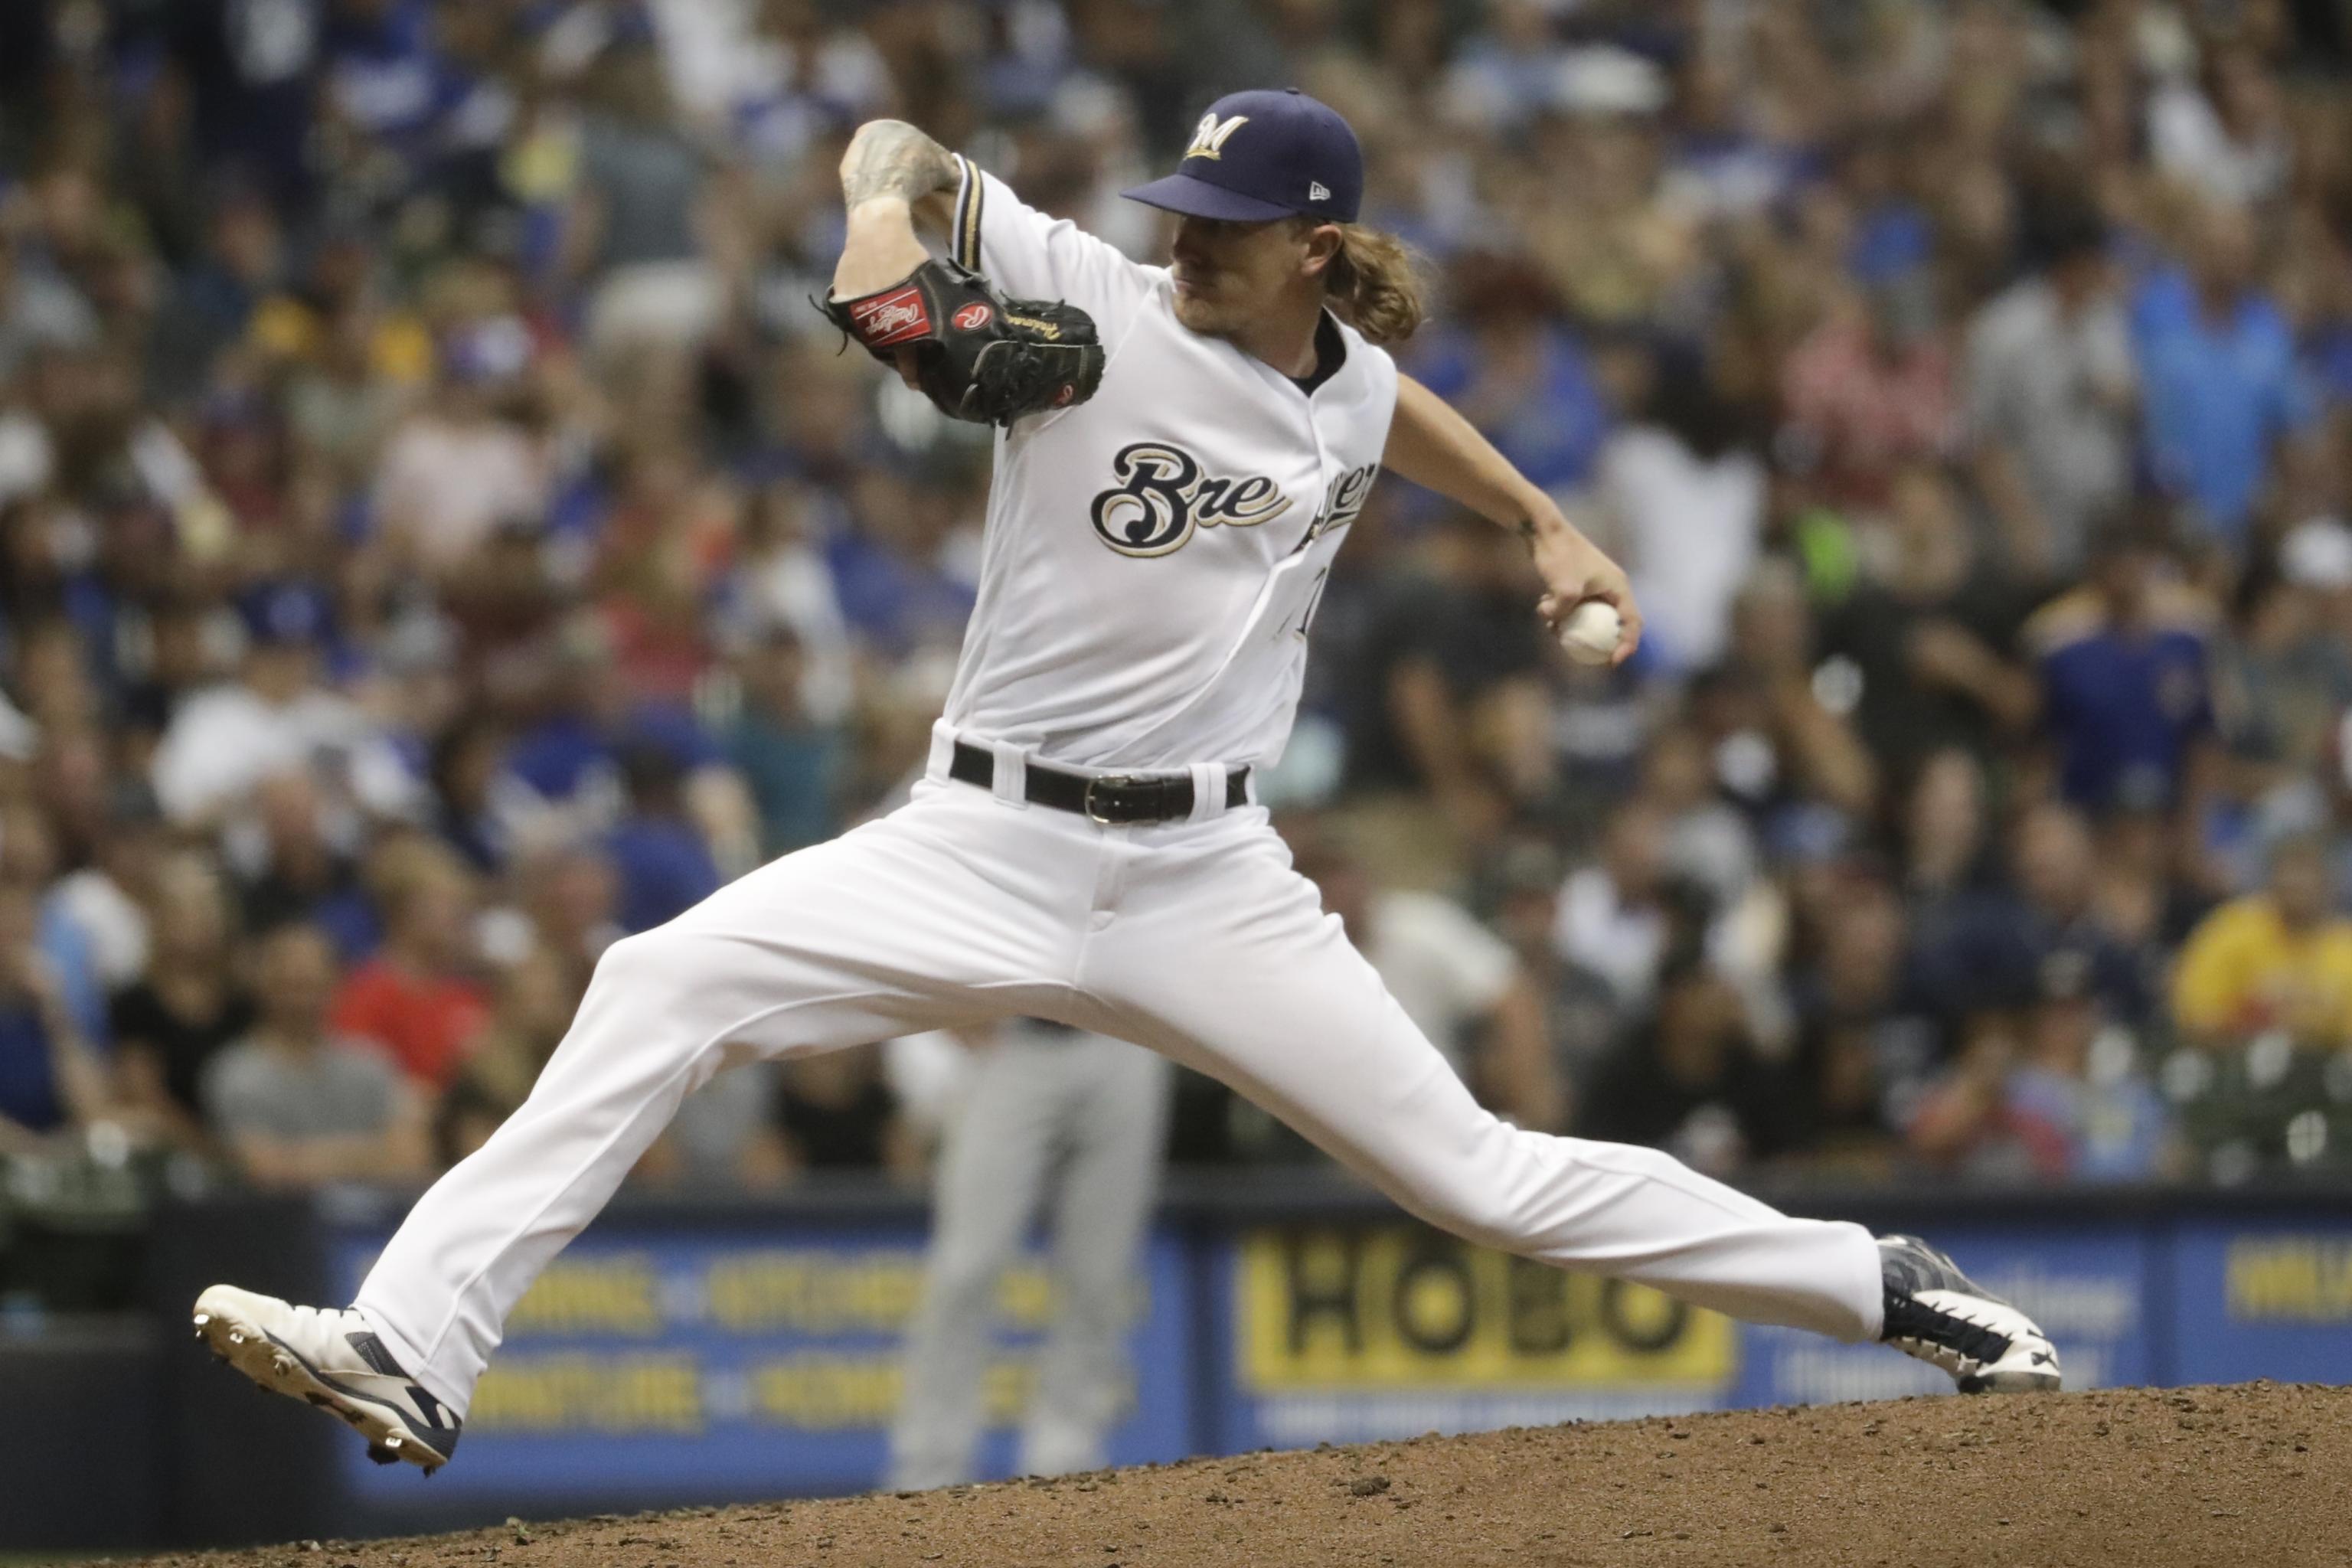 D'Amato: Brewers fans seem willing to forgive Hader for tweets